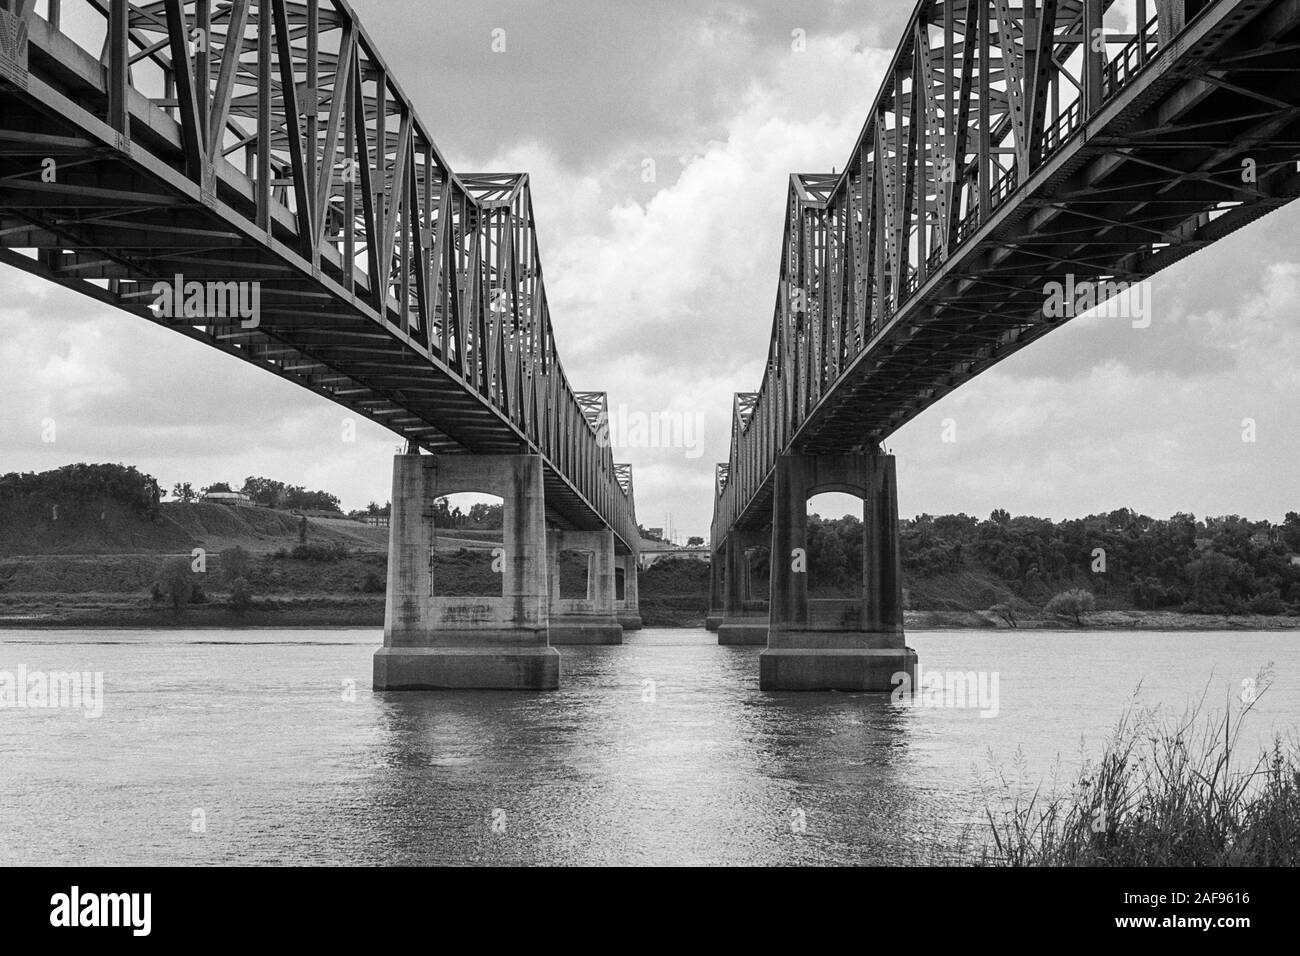 Archival black and white view on the Natchez Mississippi river bridges.  Photo taken in May 1996. Stock Photo